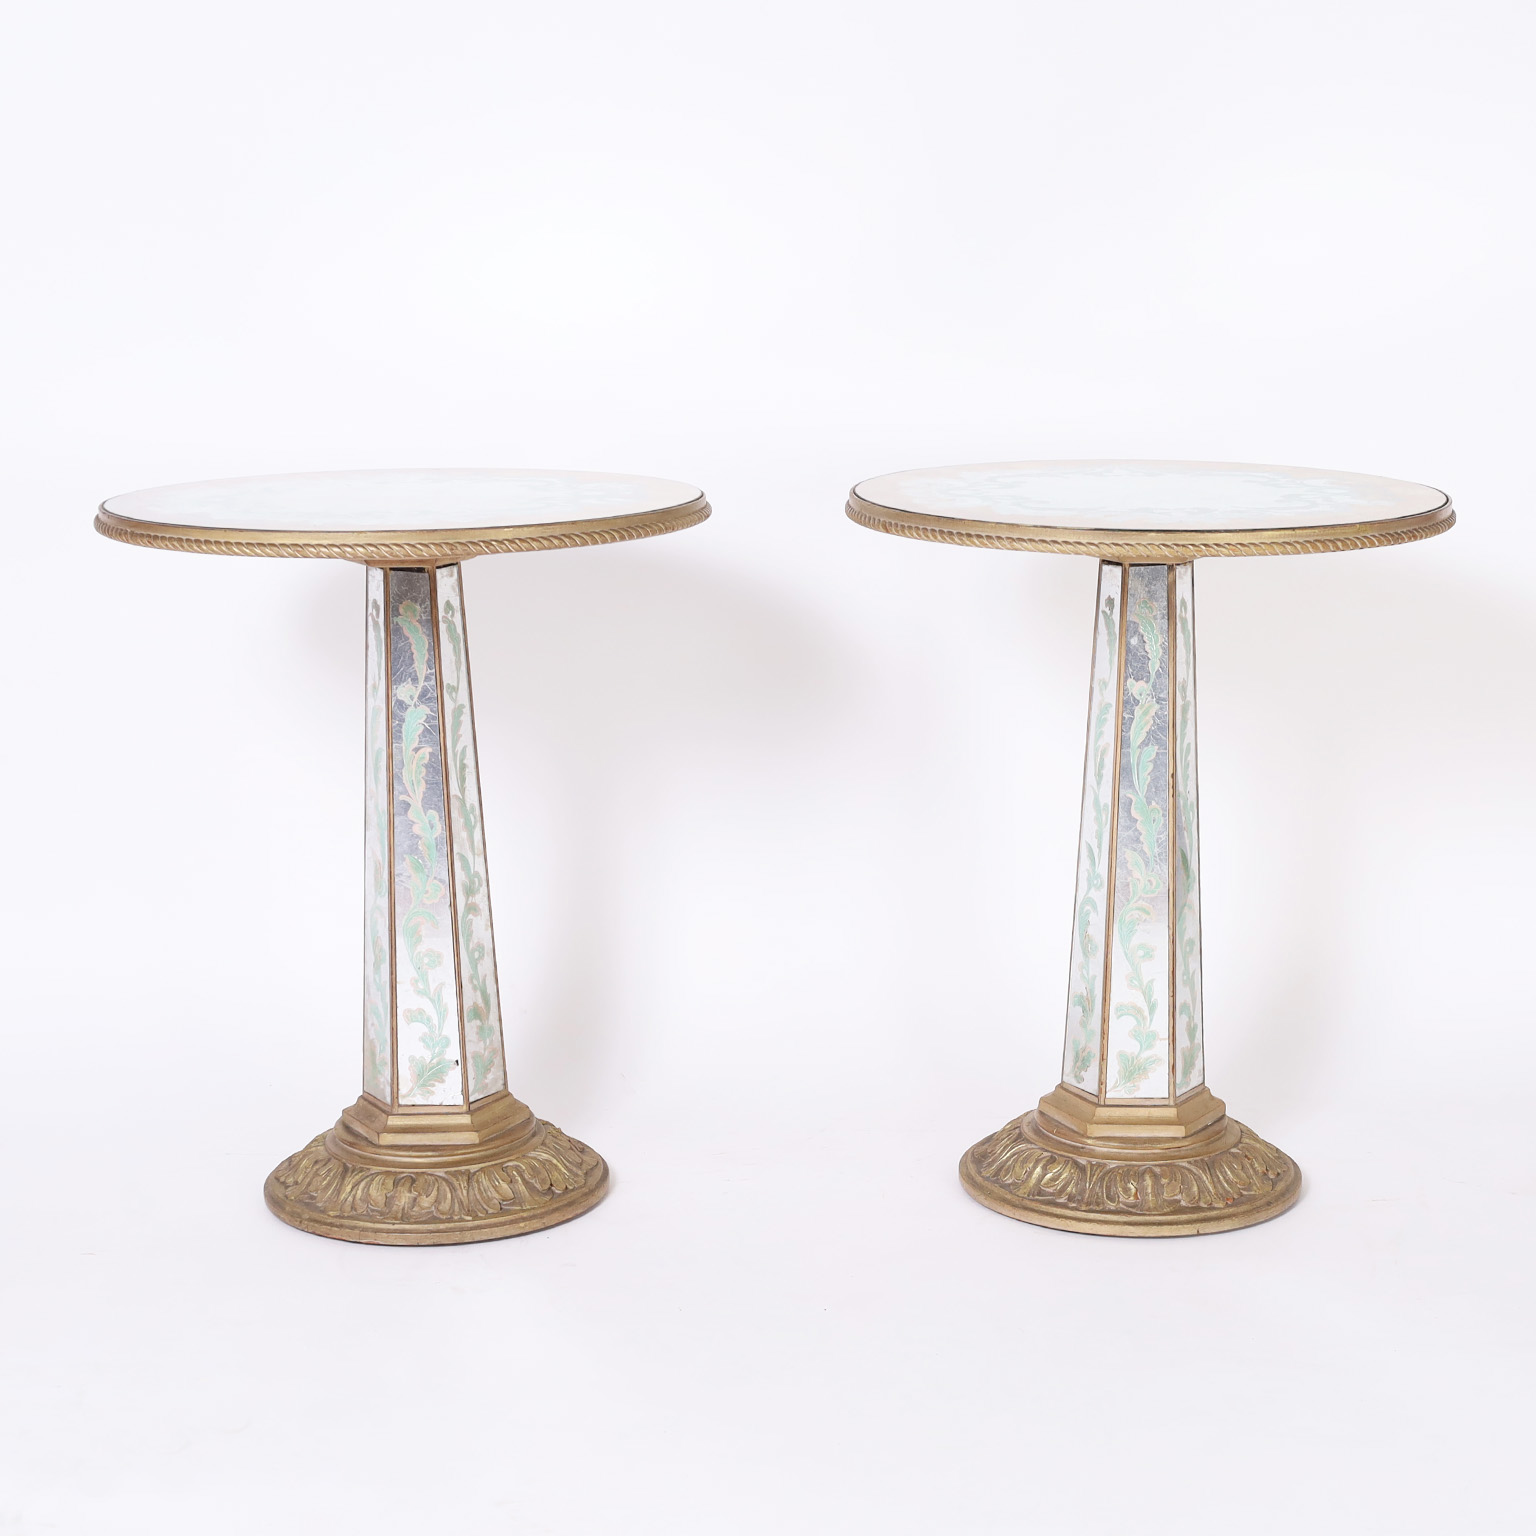 Pair of Italian Venetian Style Mirrored Round Pedestal Stands or Tables